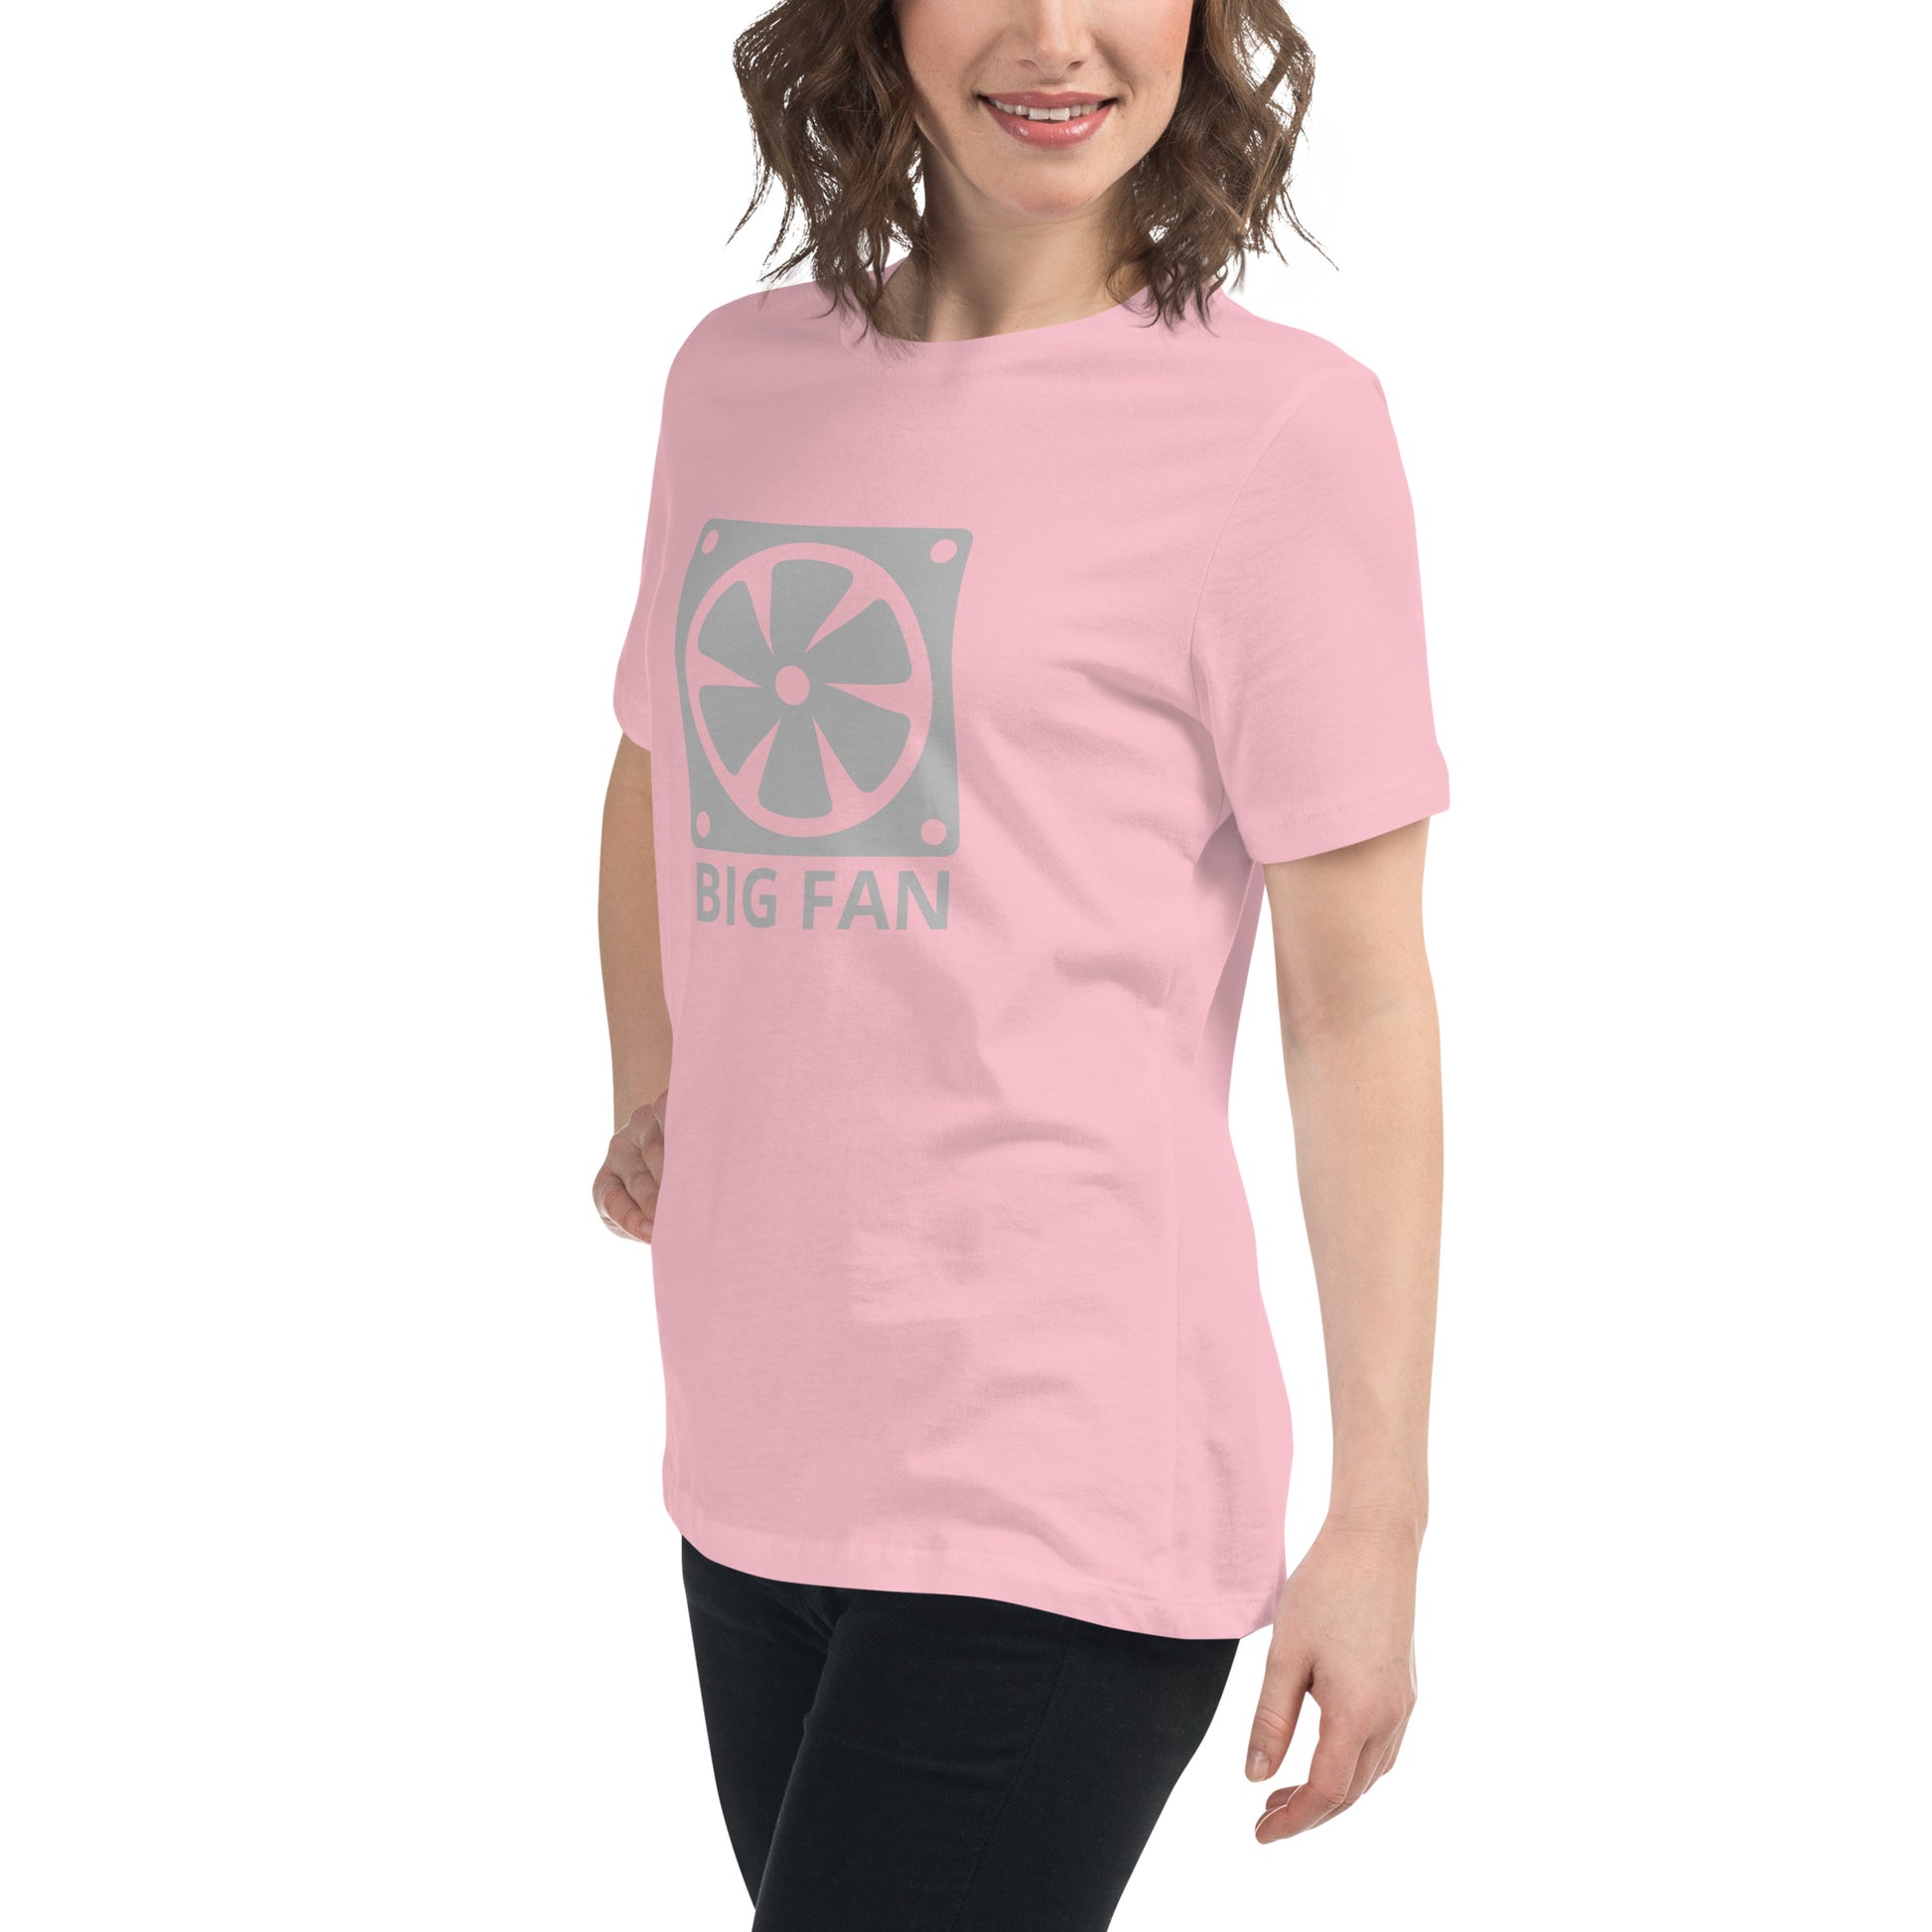 Women with pink t-shirt with image of a big computer fan and the text "BIG FAN"